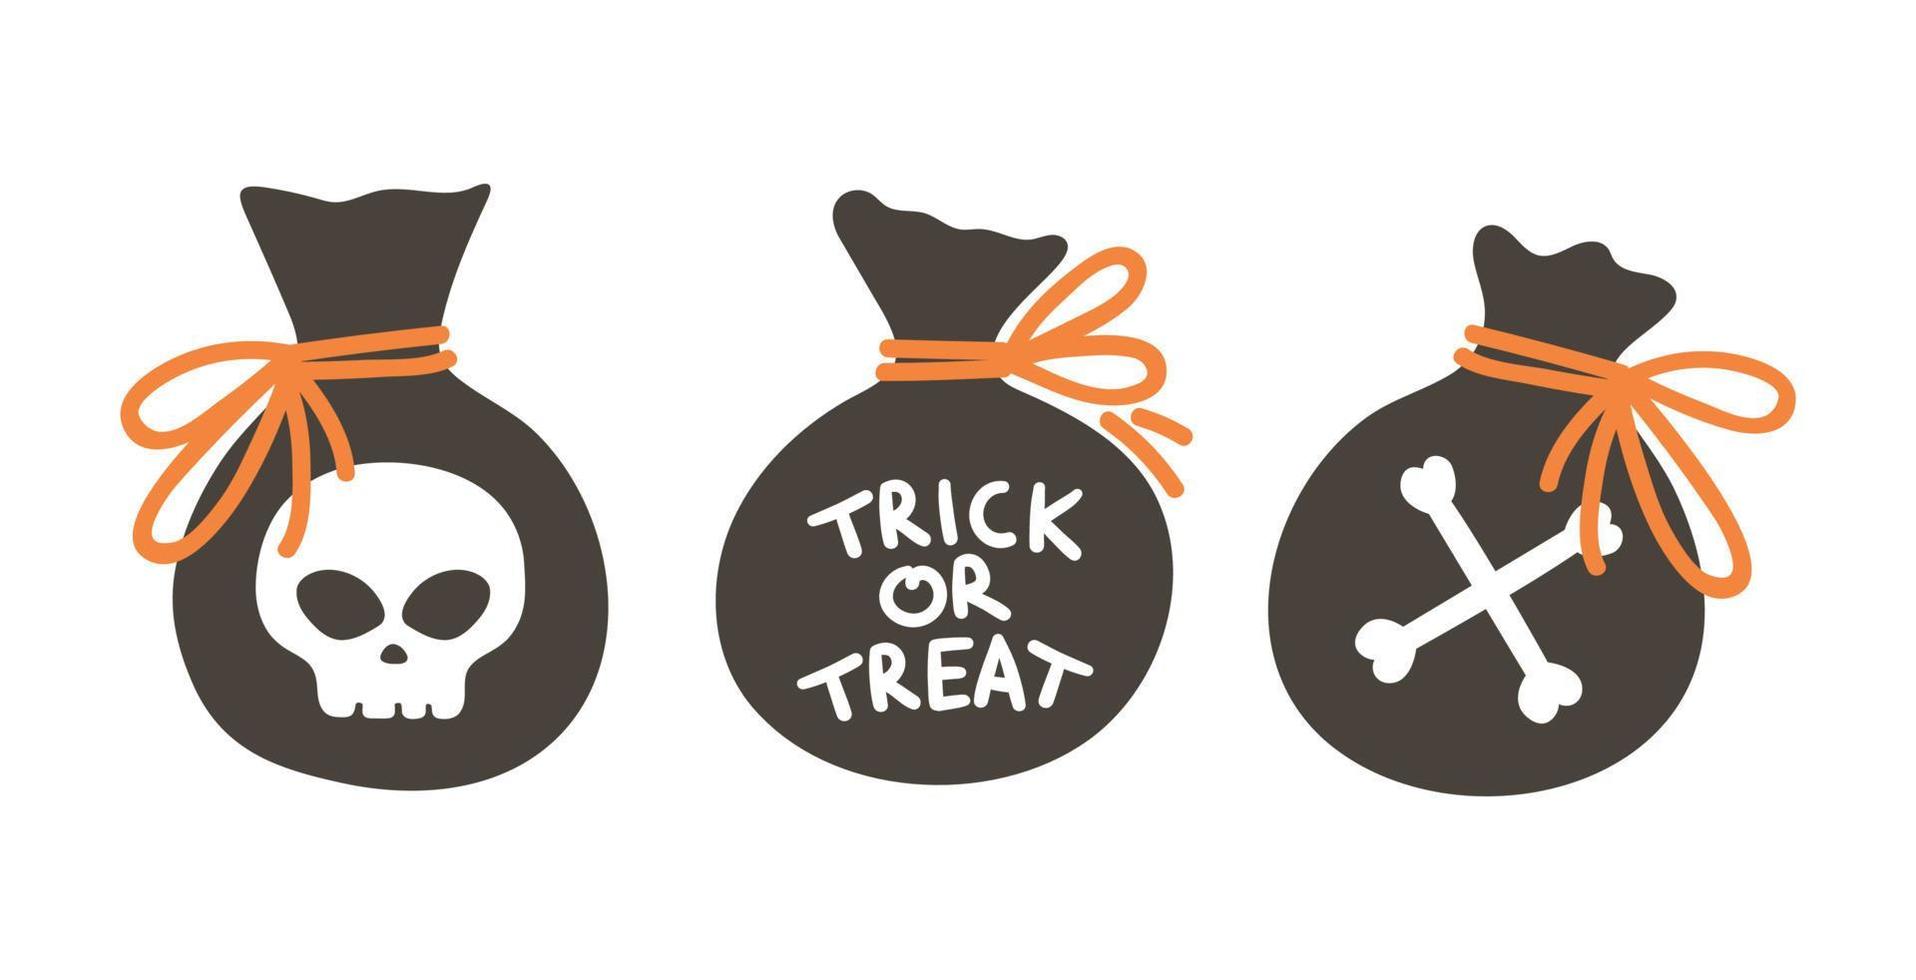 Set of vector sacks with sweets for trick or treat game. Traditional Halloween party elements. Scary bags with skull and bones collection. Samhain desserts packs. Autumn holiday design